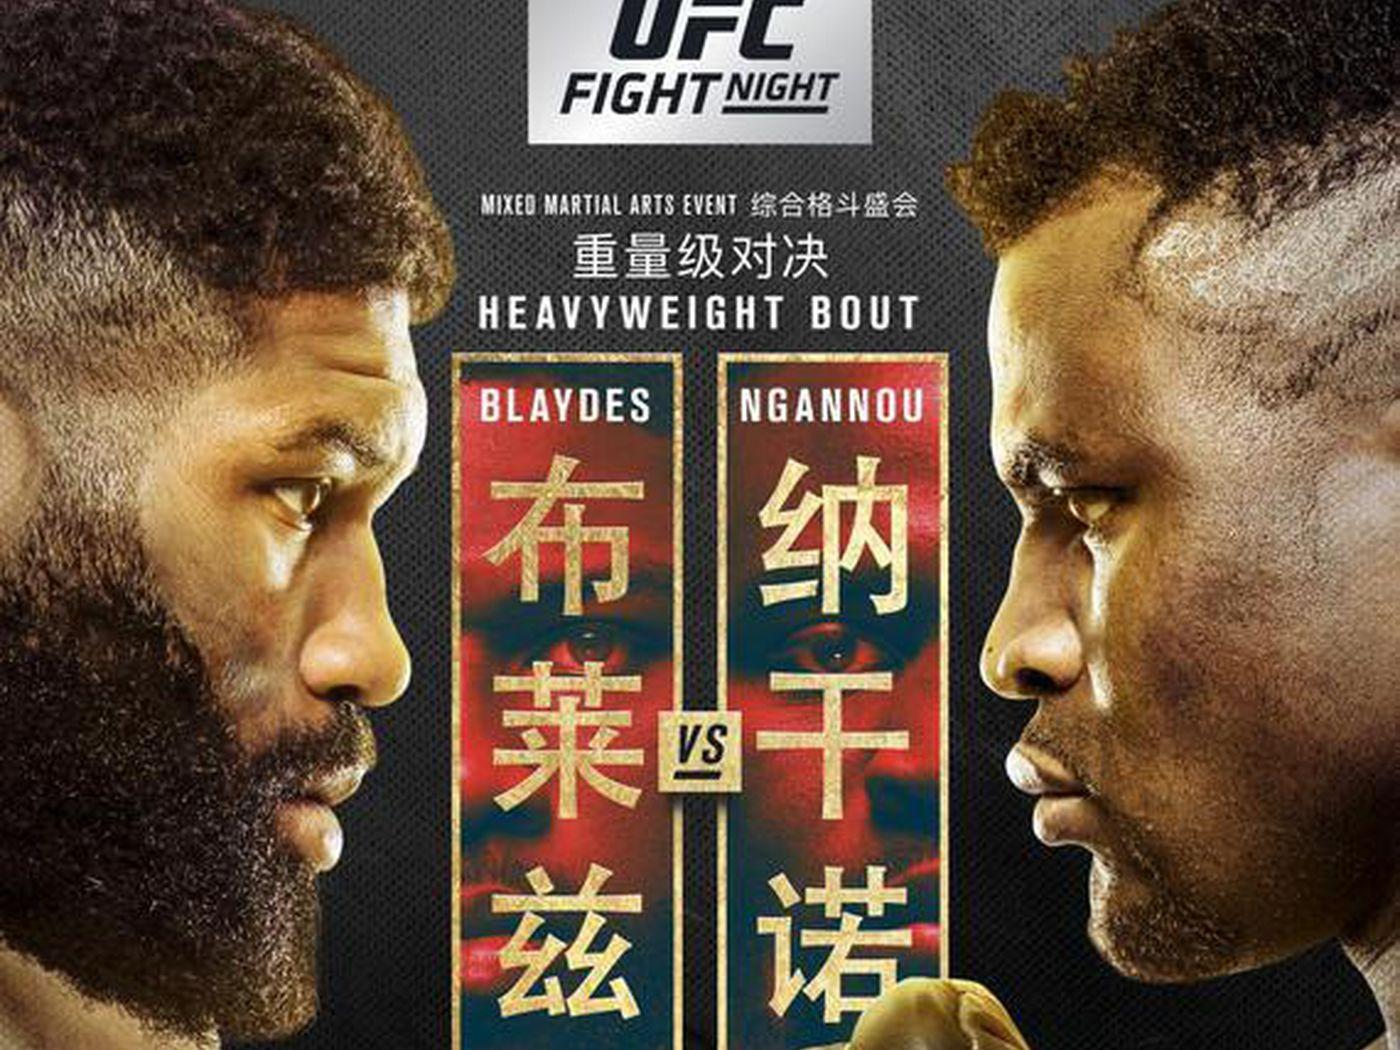 The fight poster for UFC Beijing. Photo by UFC.